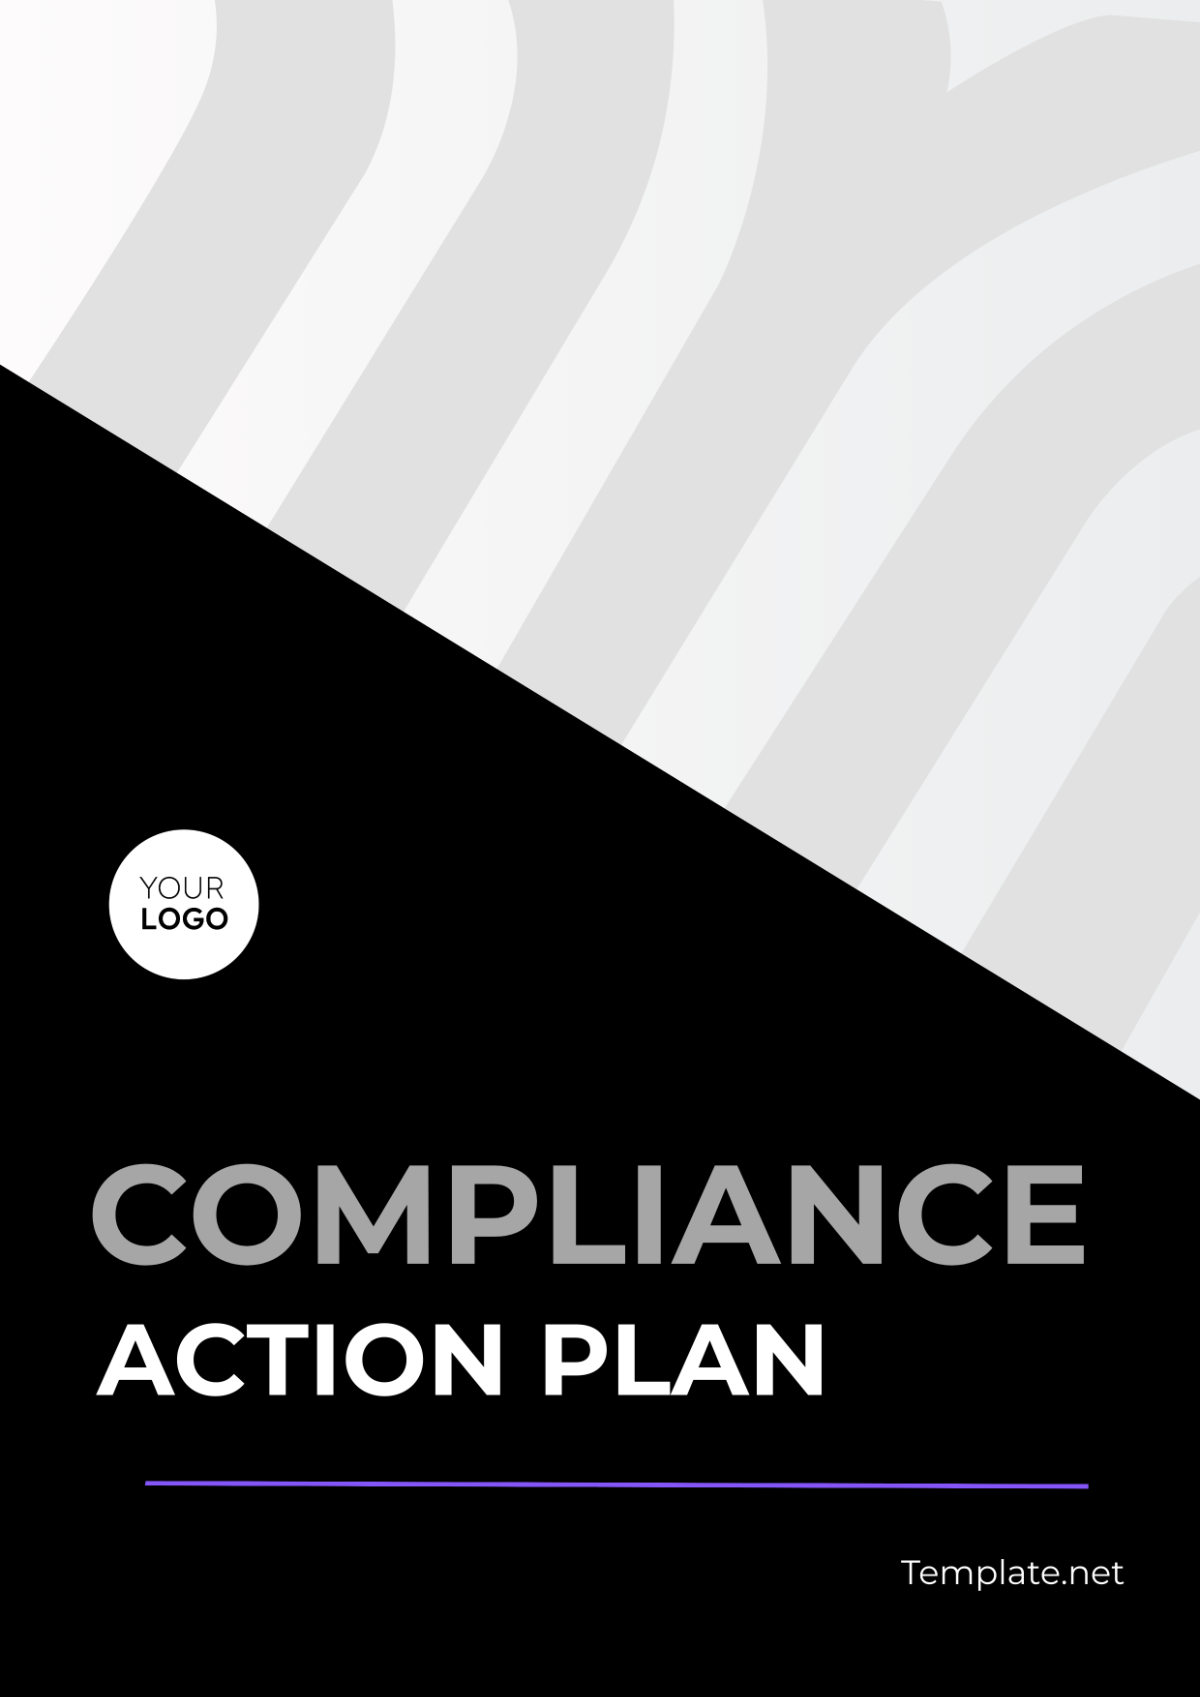 Compliance Action Plan Template